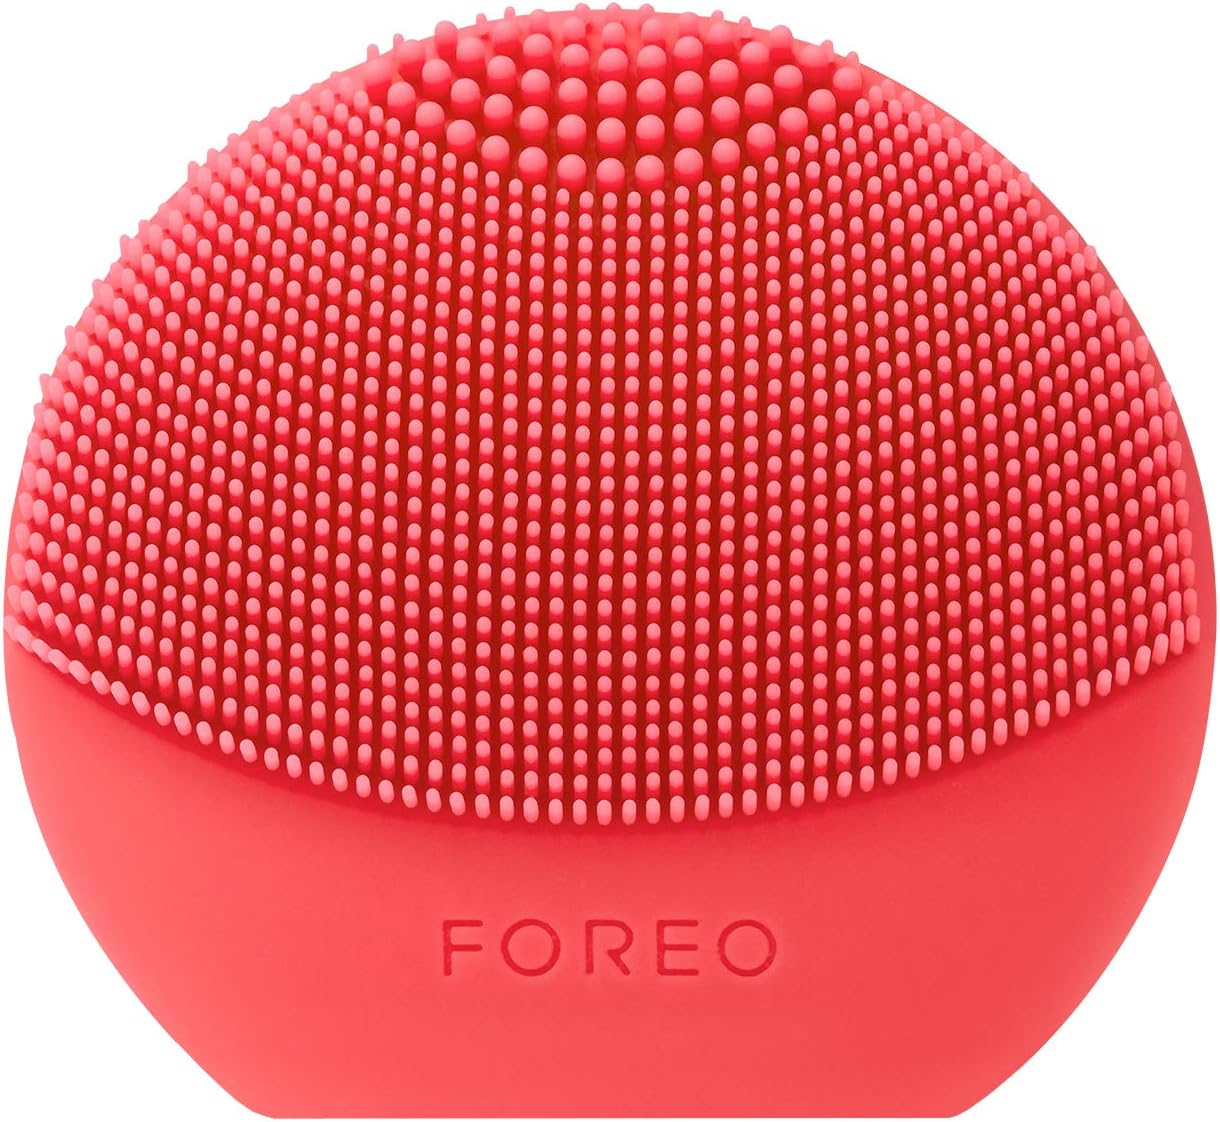 FOREO LUNA play plus 2 - Facial Cleansing Brush - 1-min Deep Facial Cleanser - Travel Accessories - Silicone Face Massager - Holiday Essentials - Ultra-hygienic - All Skin Types - Peach Of Cake!